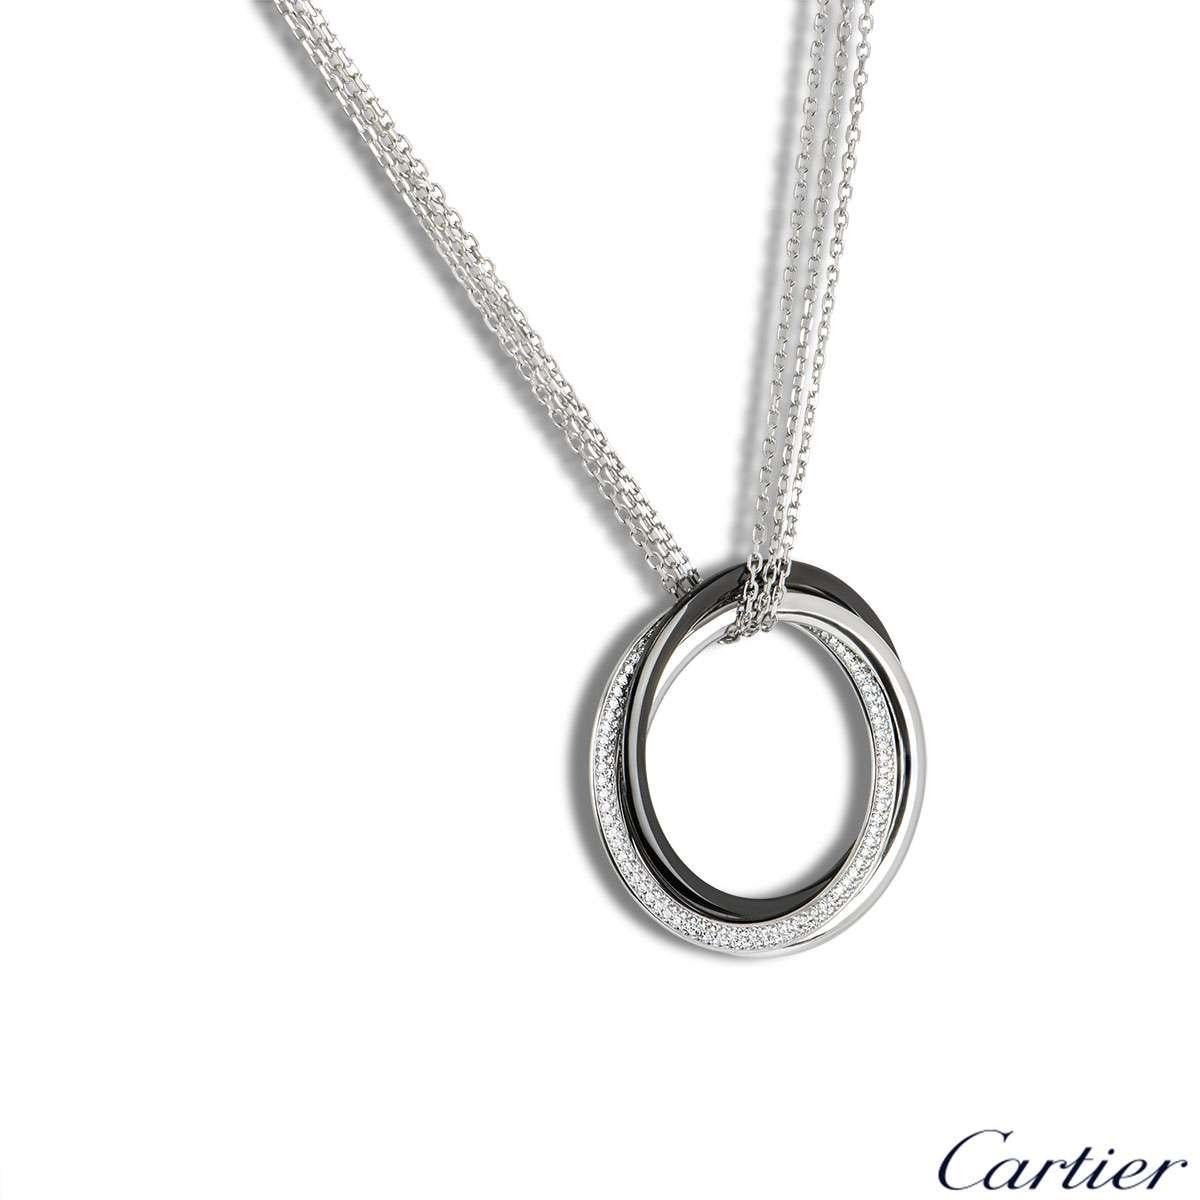 A stylish 18k white gold Cartier diamond and ceramic necklace from the Trinity de Cartier collection. The pendant features triple interlaced rings, two in white gold and one black ceramic, one white gold ring has 166 round brilliant cut diamonds